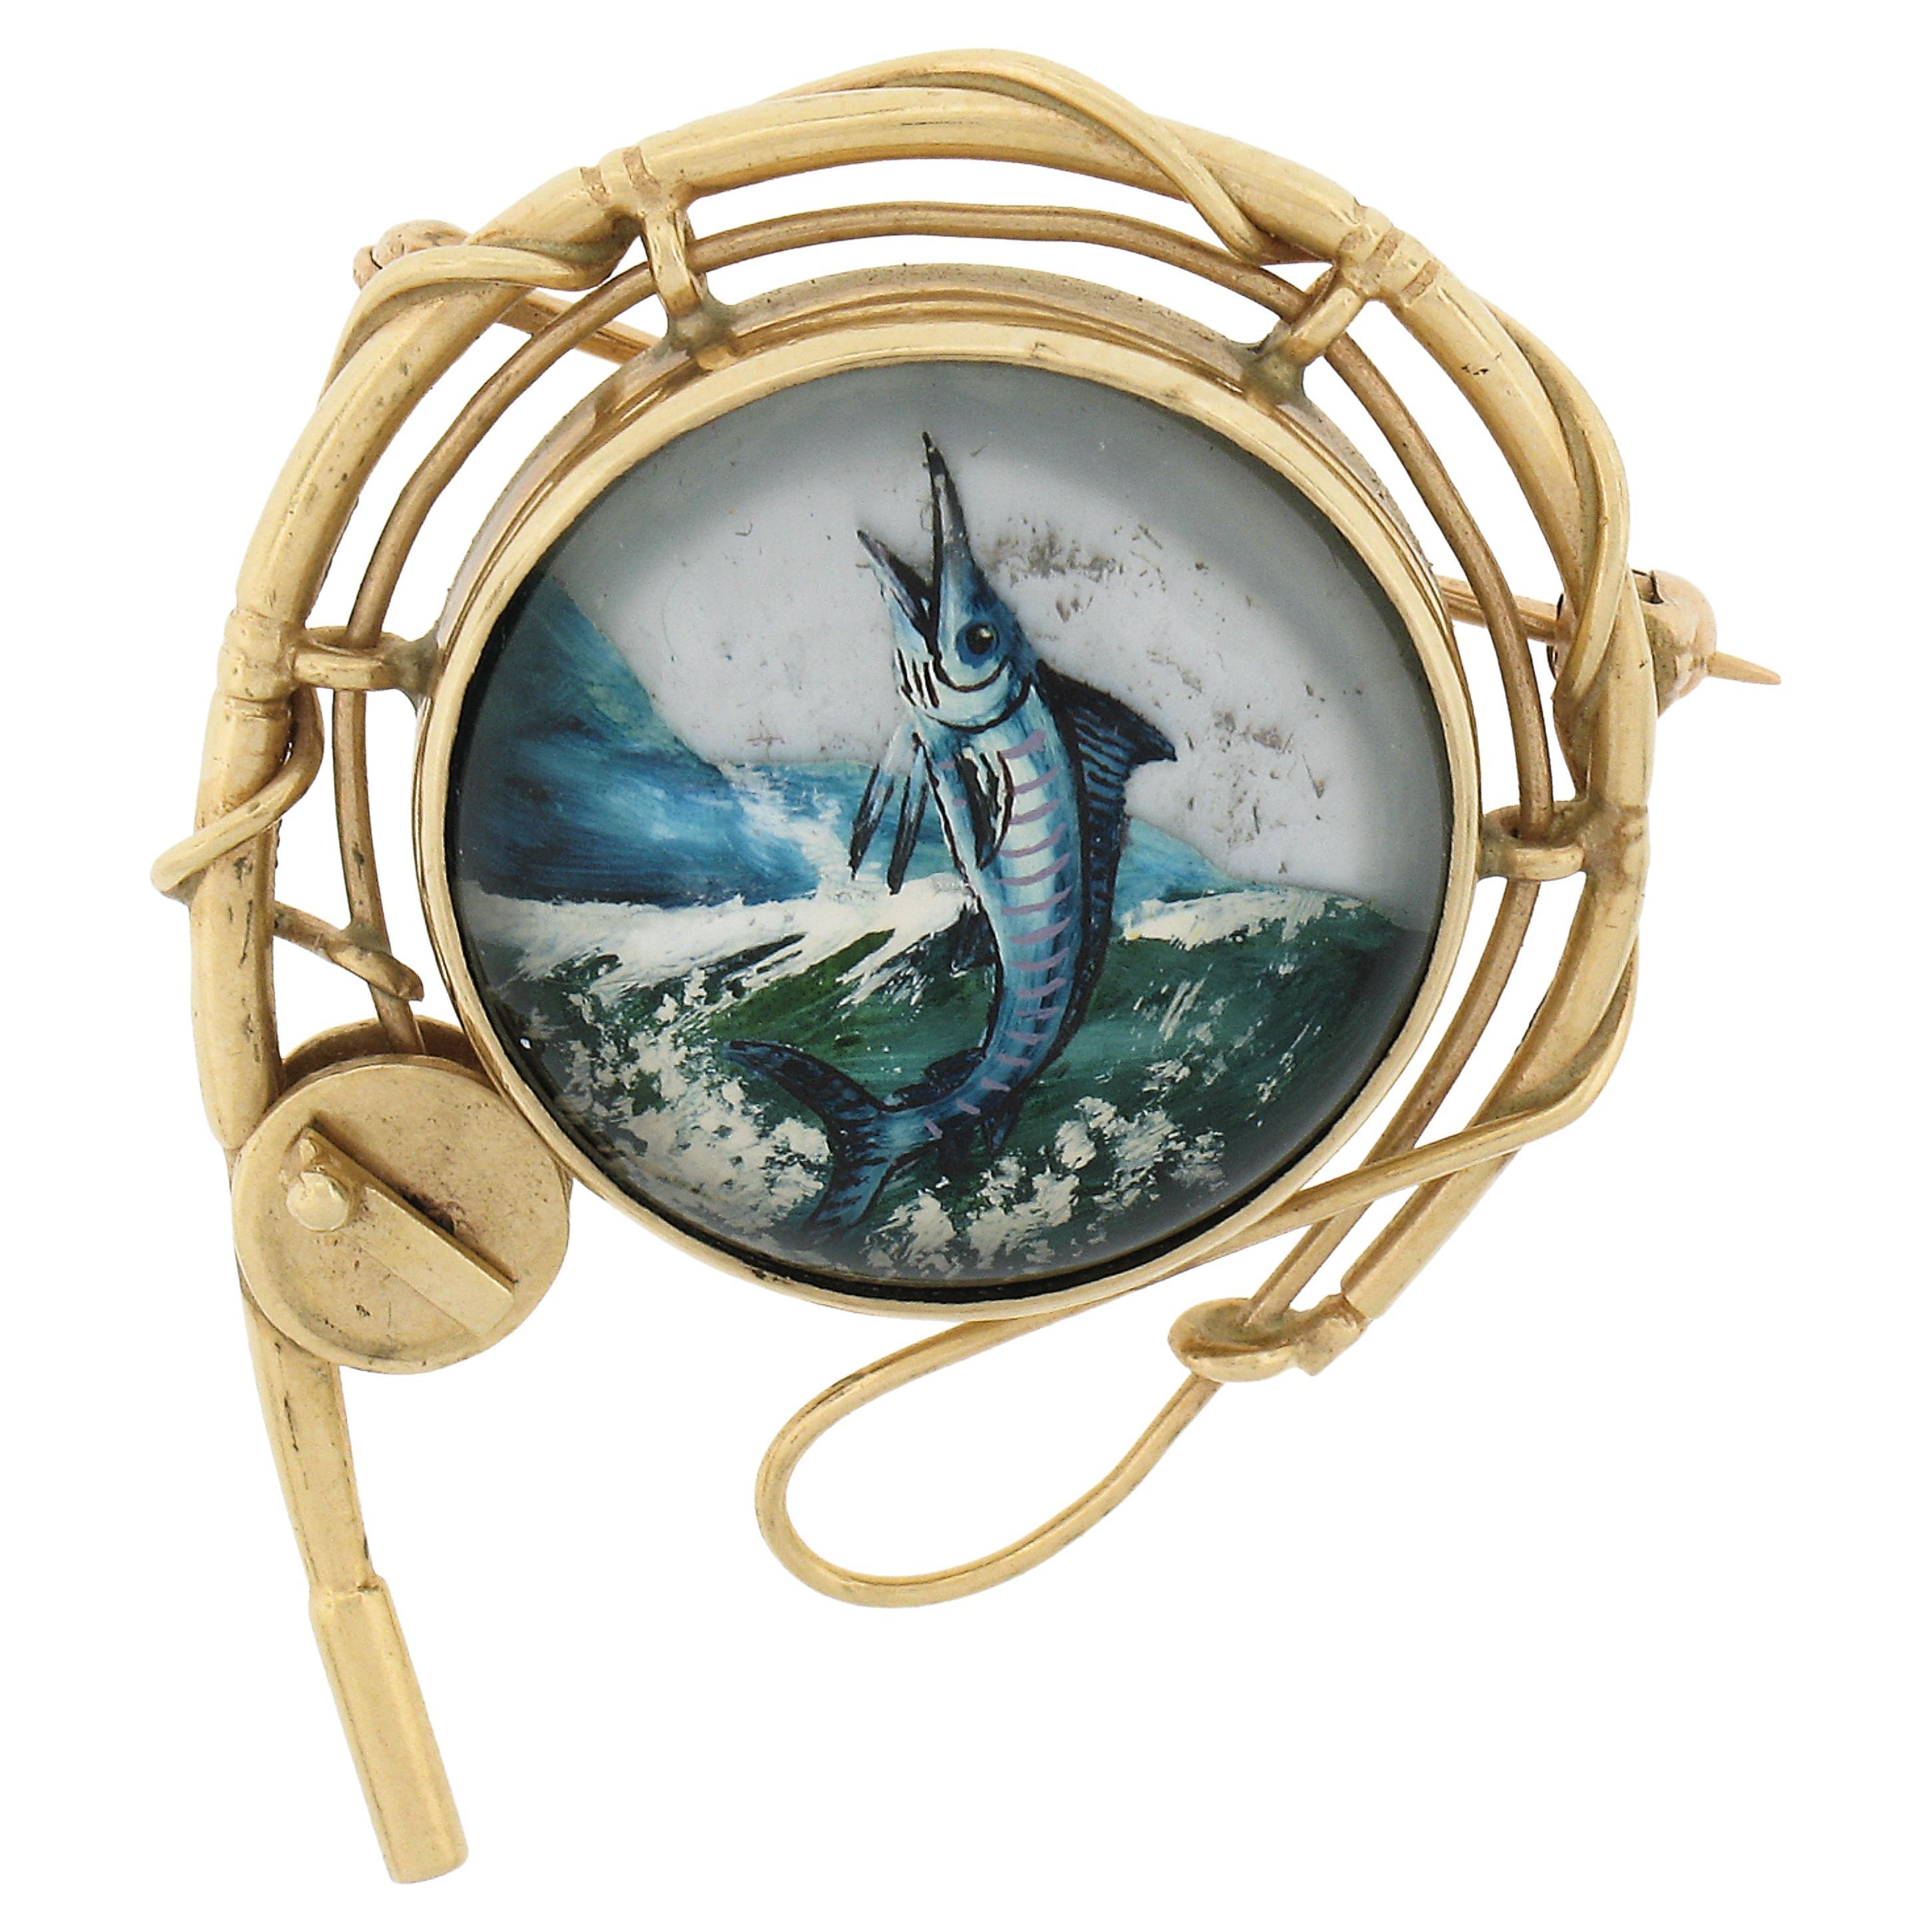 14k Gold Reverse Painted Marlin Fish Intaglio w/ Fishing Pole Frame Pin Brooch For Sale